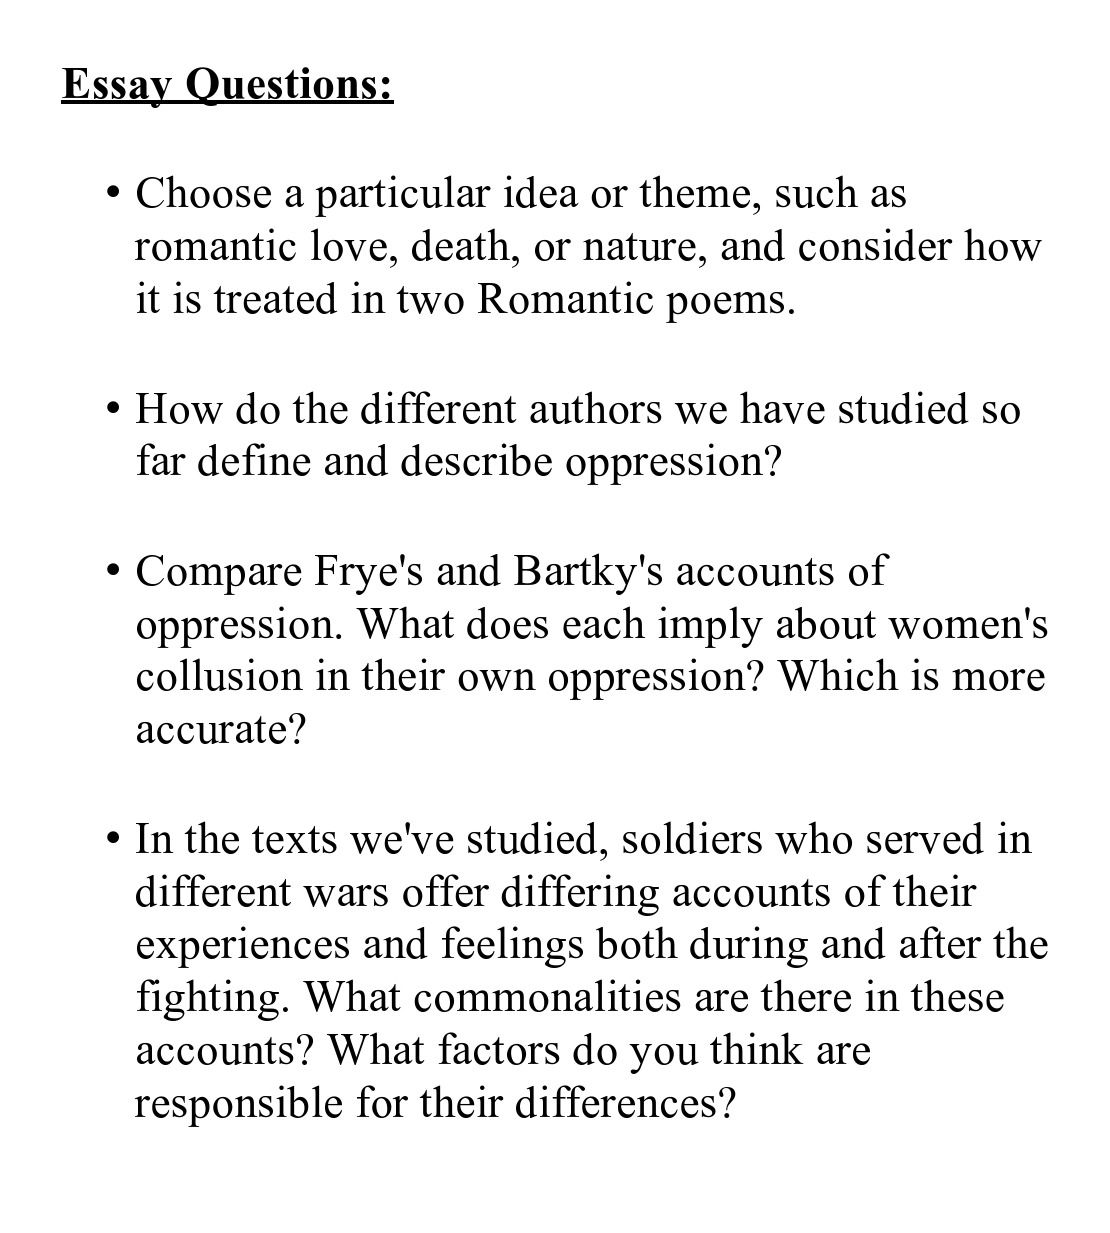 The help essay questions